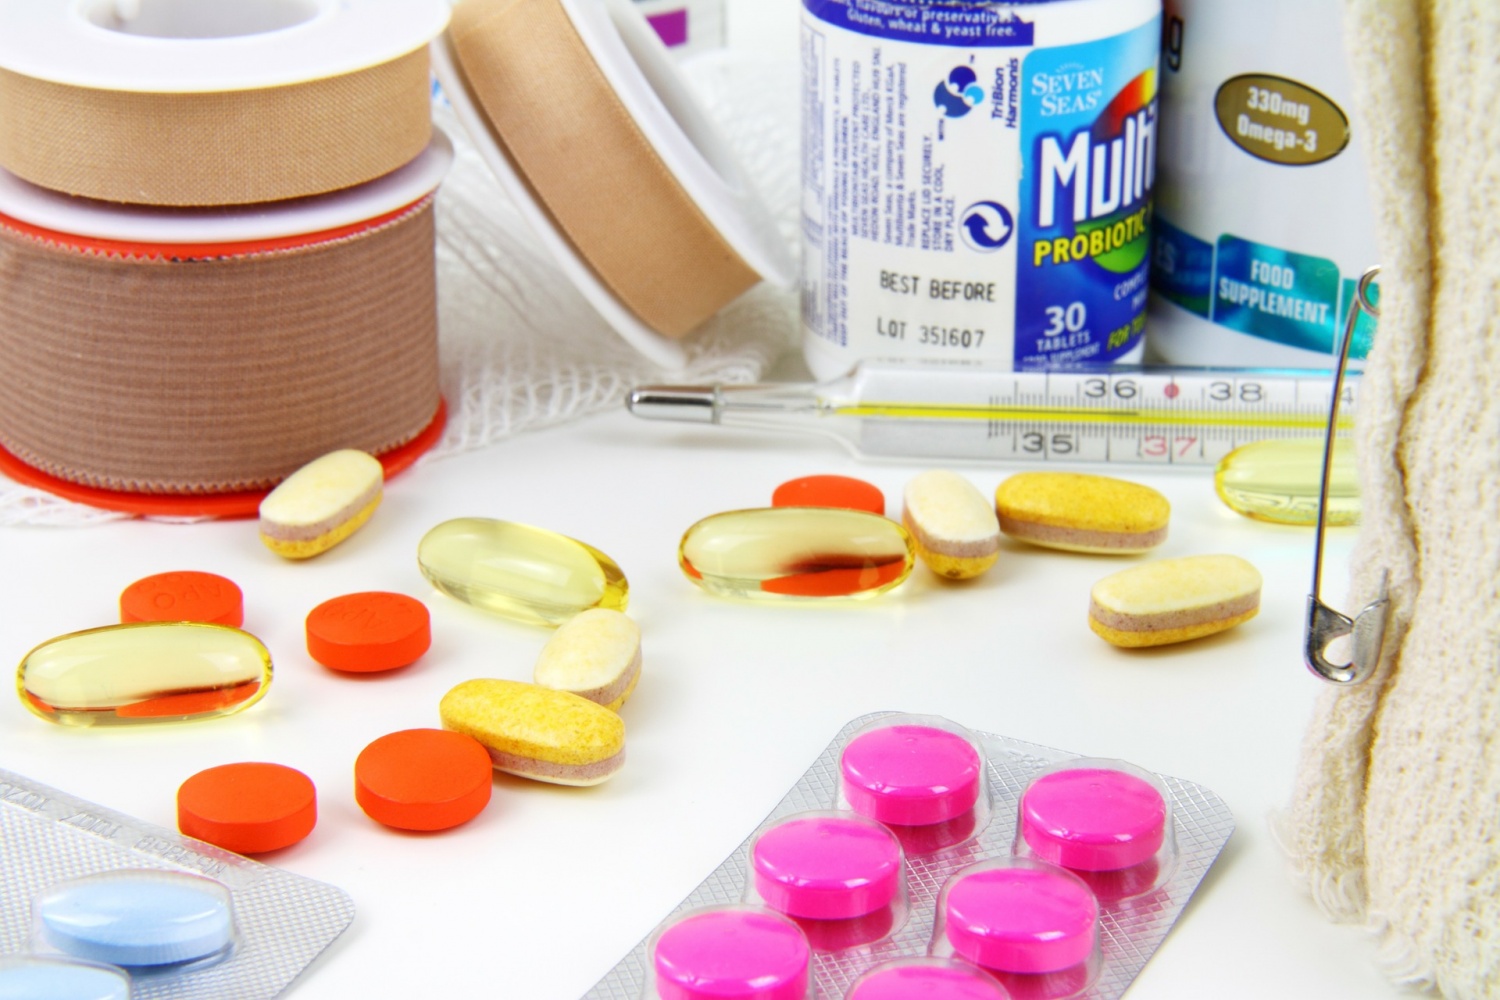 What You Should Know About Pharmacy Errors